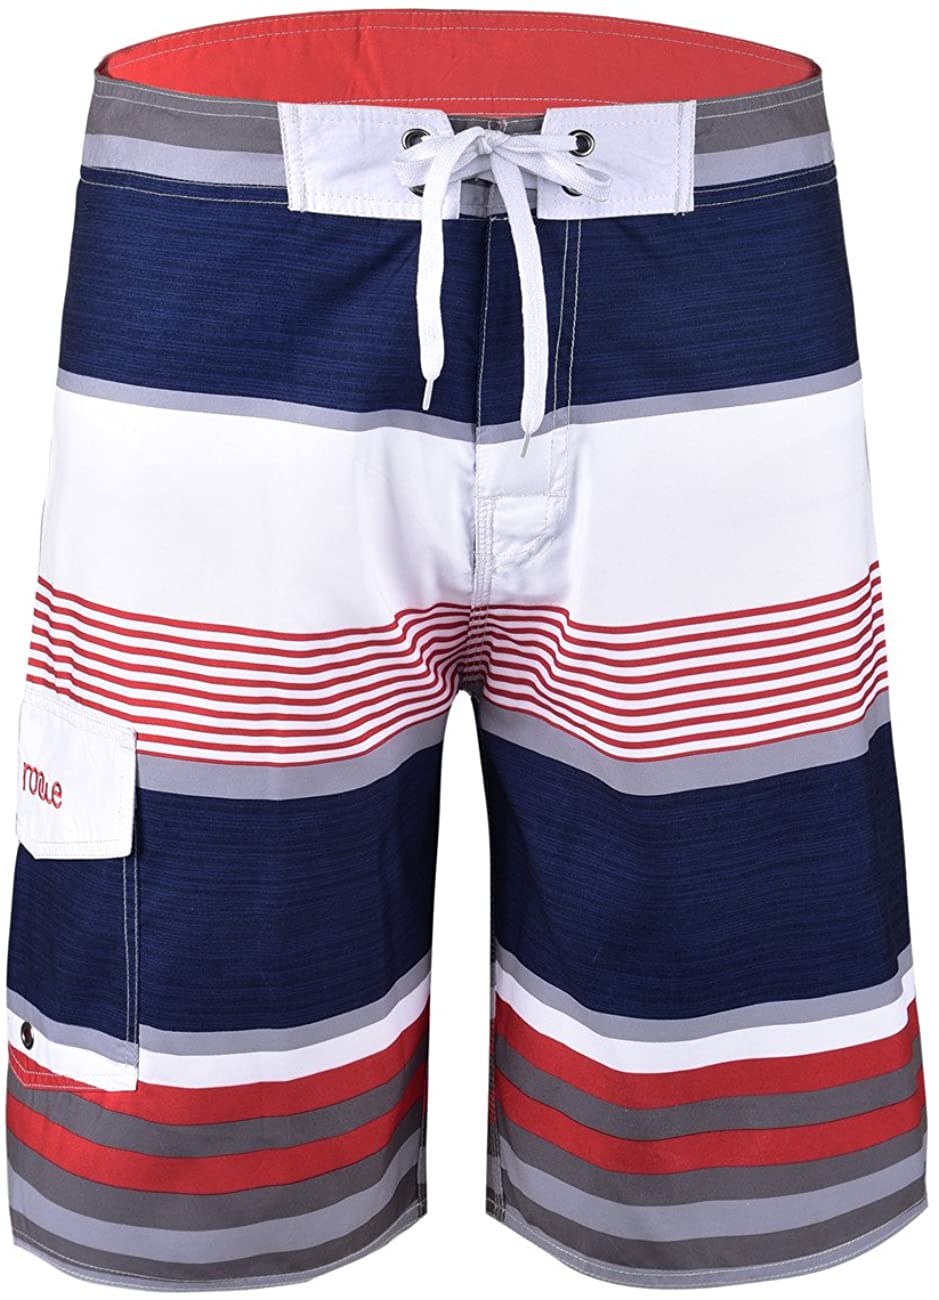 Nonwe Men's Quick Dry Swim Trunks Colorful Stripe Beach Shorts with Mesh Lining 